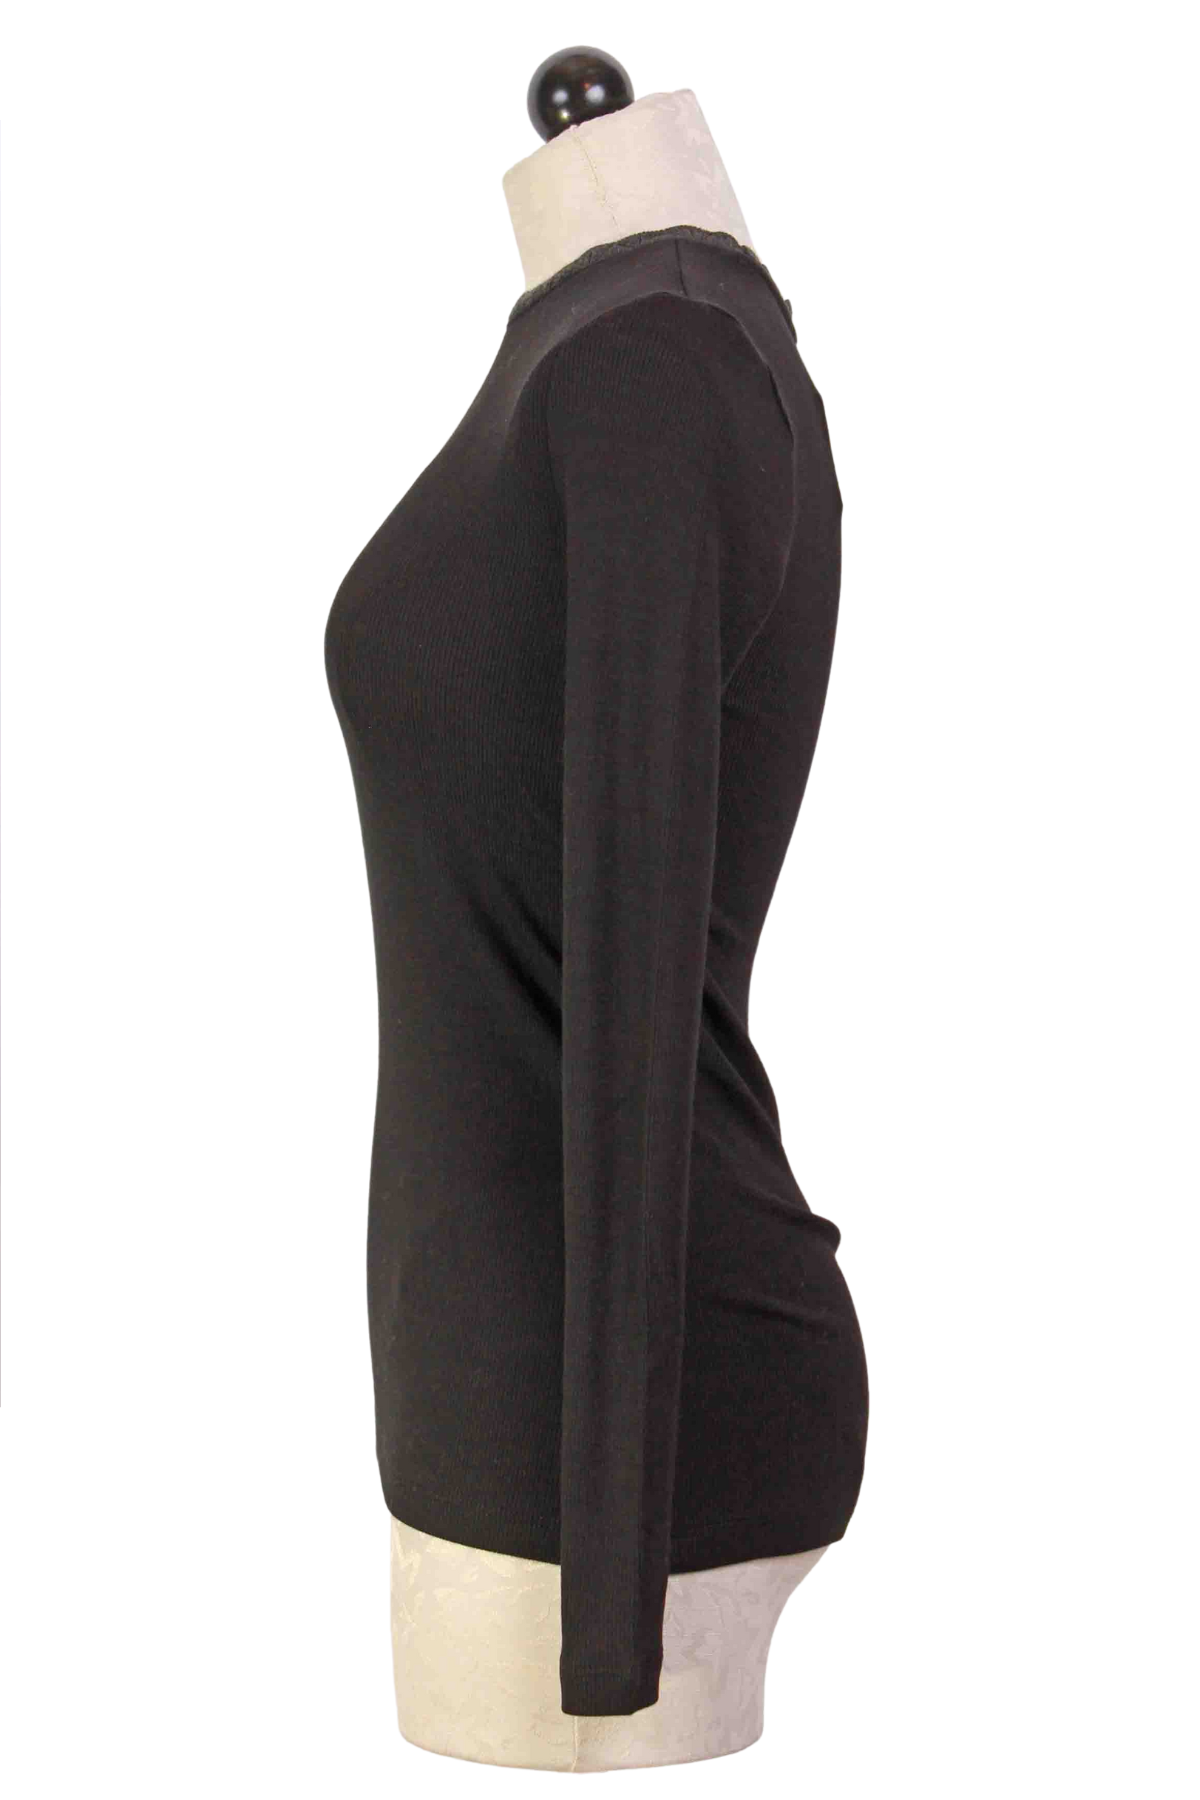 Side view of Black/Charcoal Grey Soft Long Sleeve Pointelle Trim Rib Tee by Goldie LeWinter